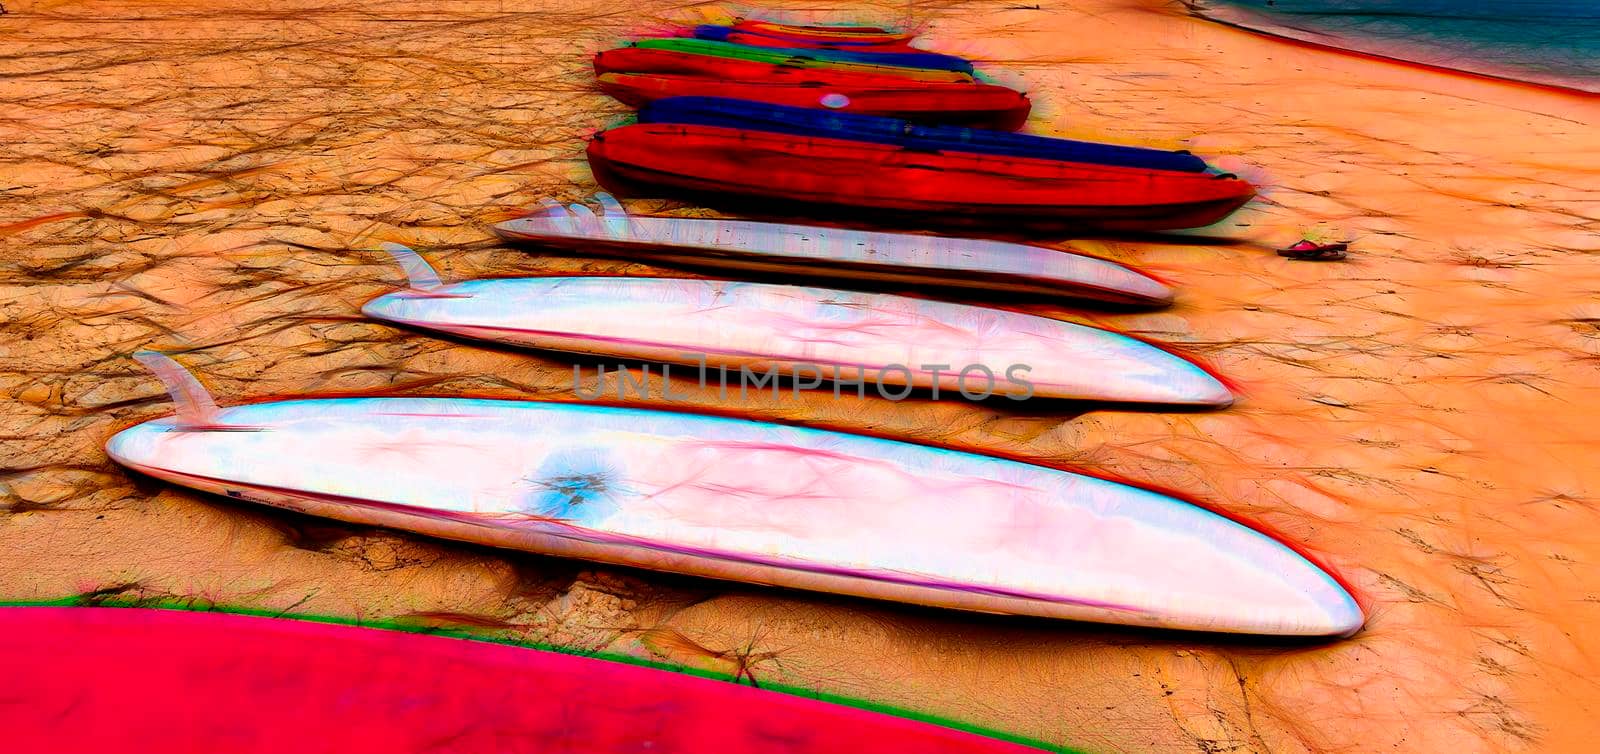 Blurred Abstract Surfboards And Kayaks Illustration by 	JacksonStock